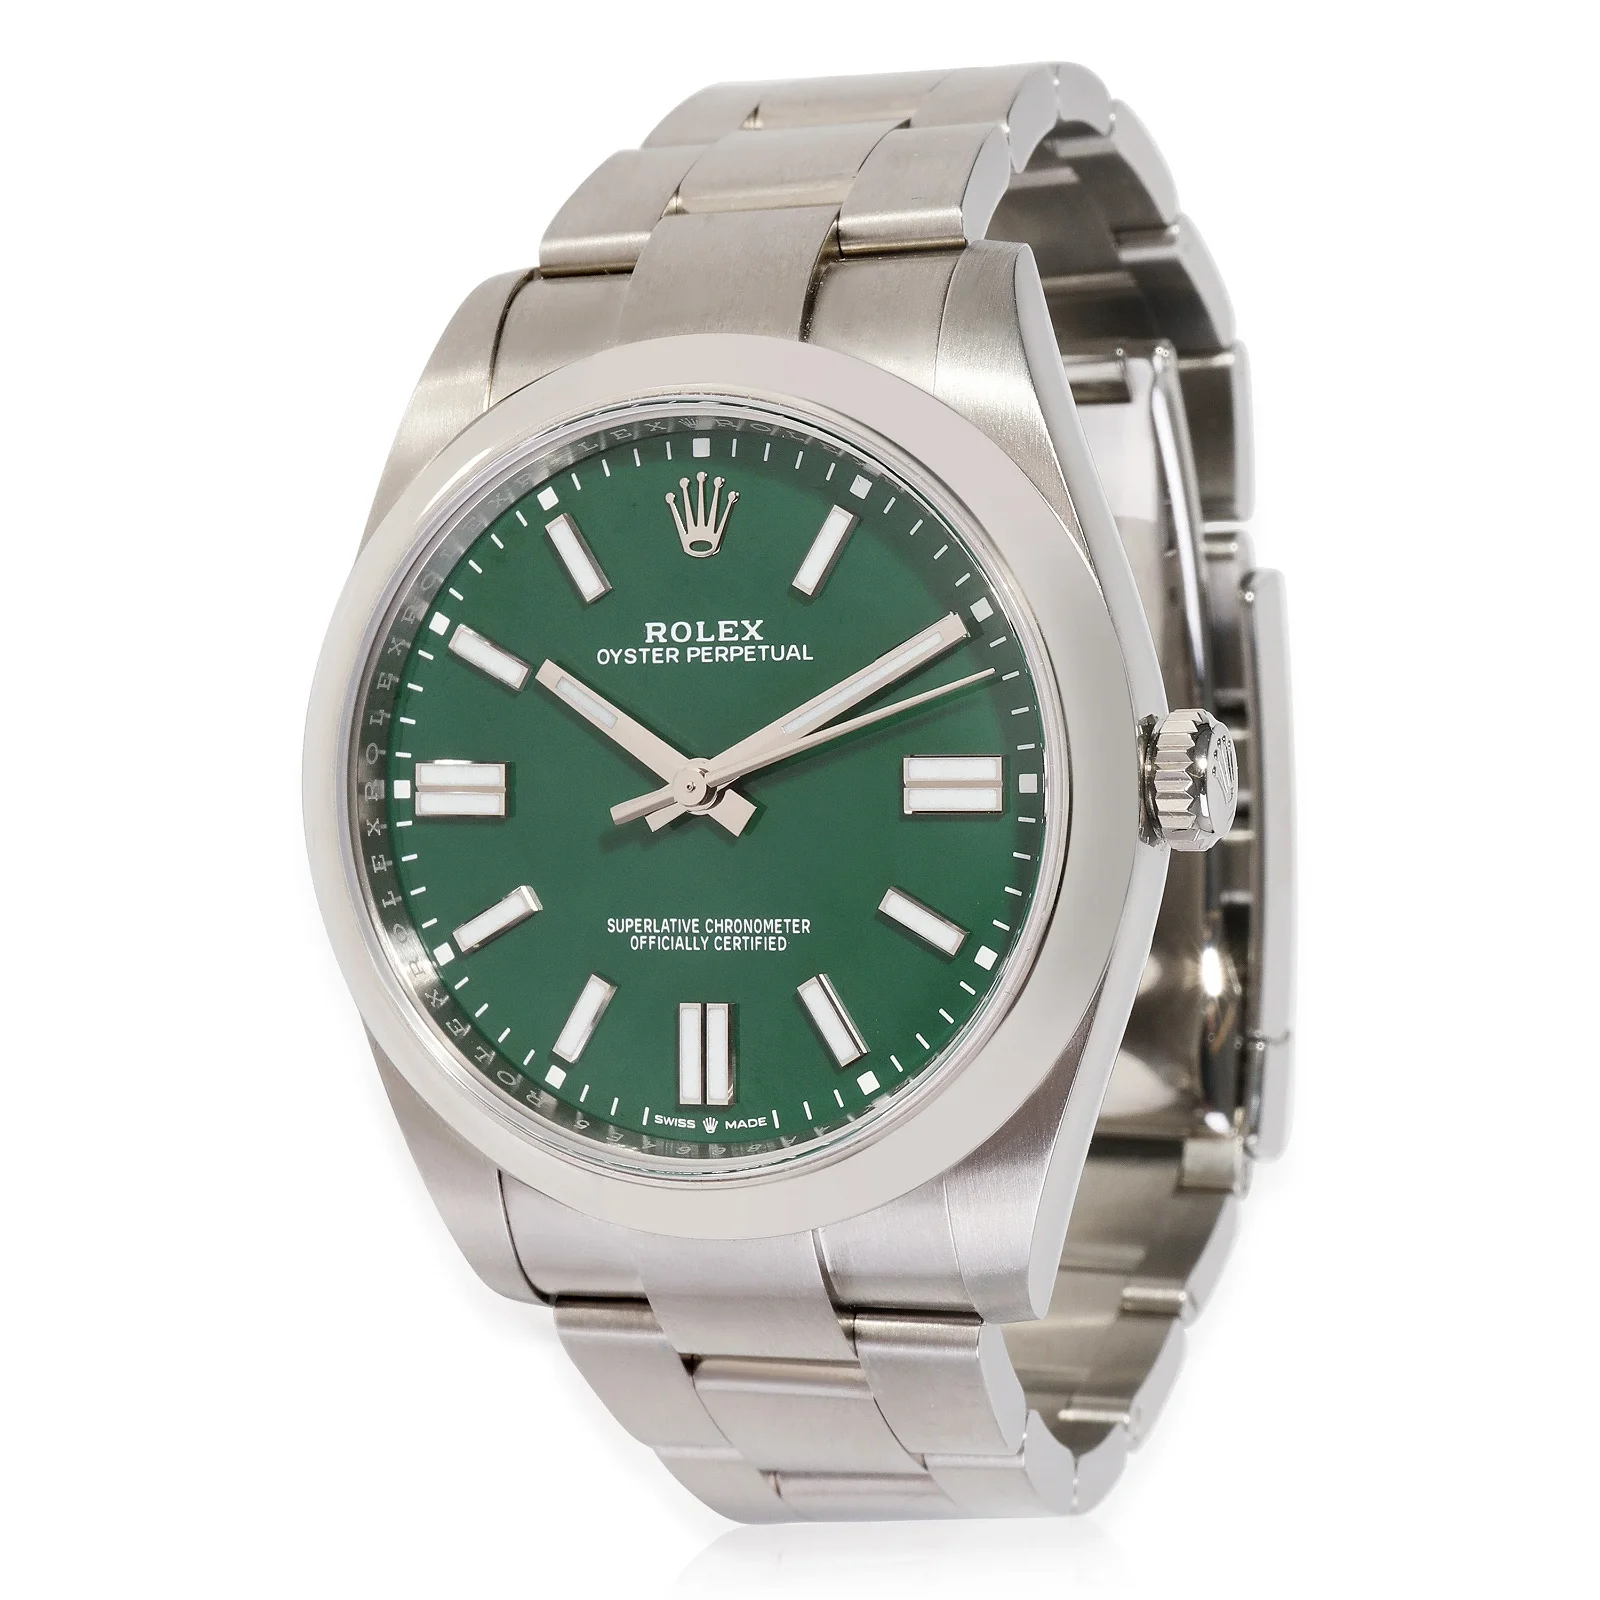 Image of Rolex Oyster Perpetual 124300 Men's Watch in Stainless Steel